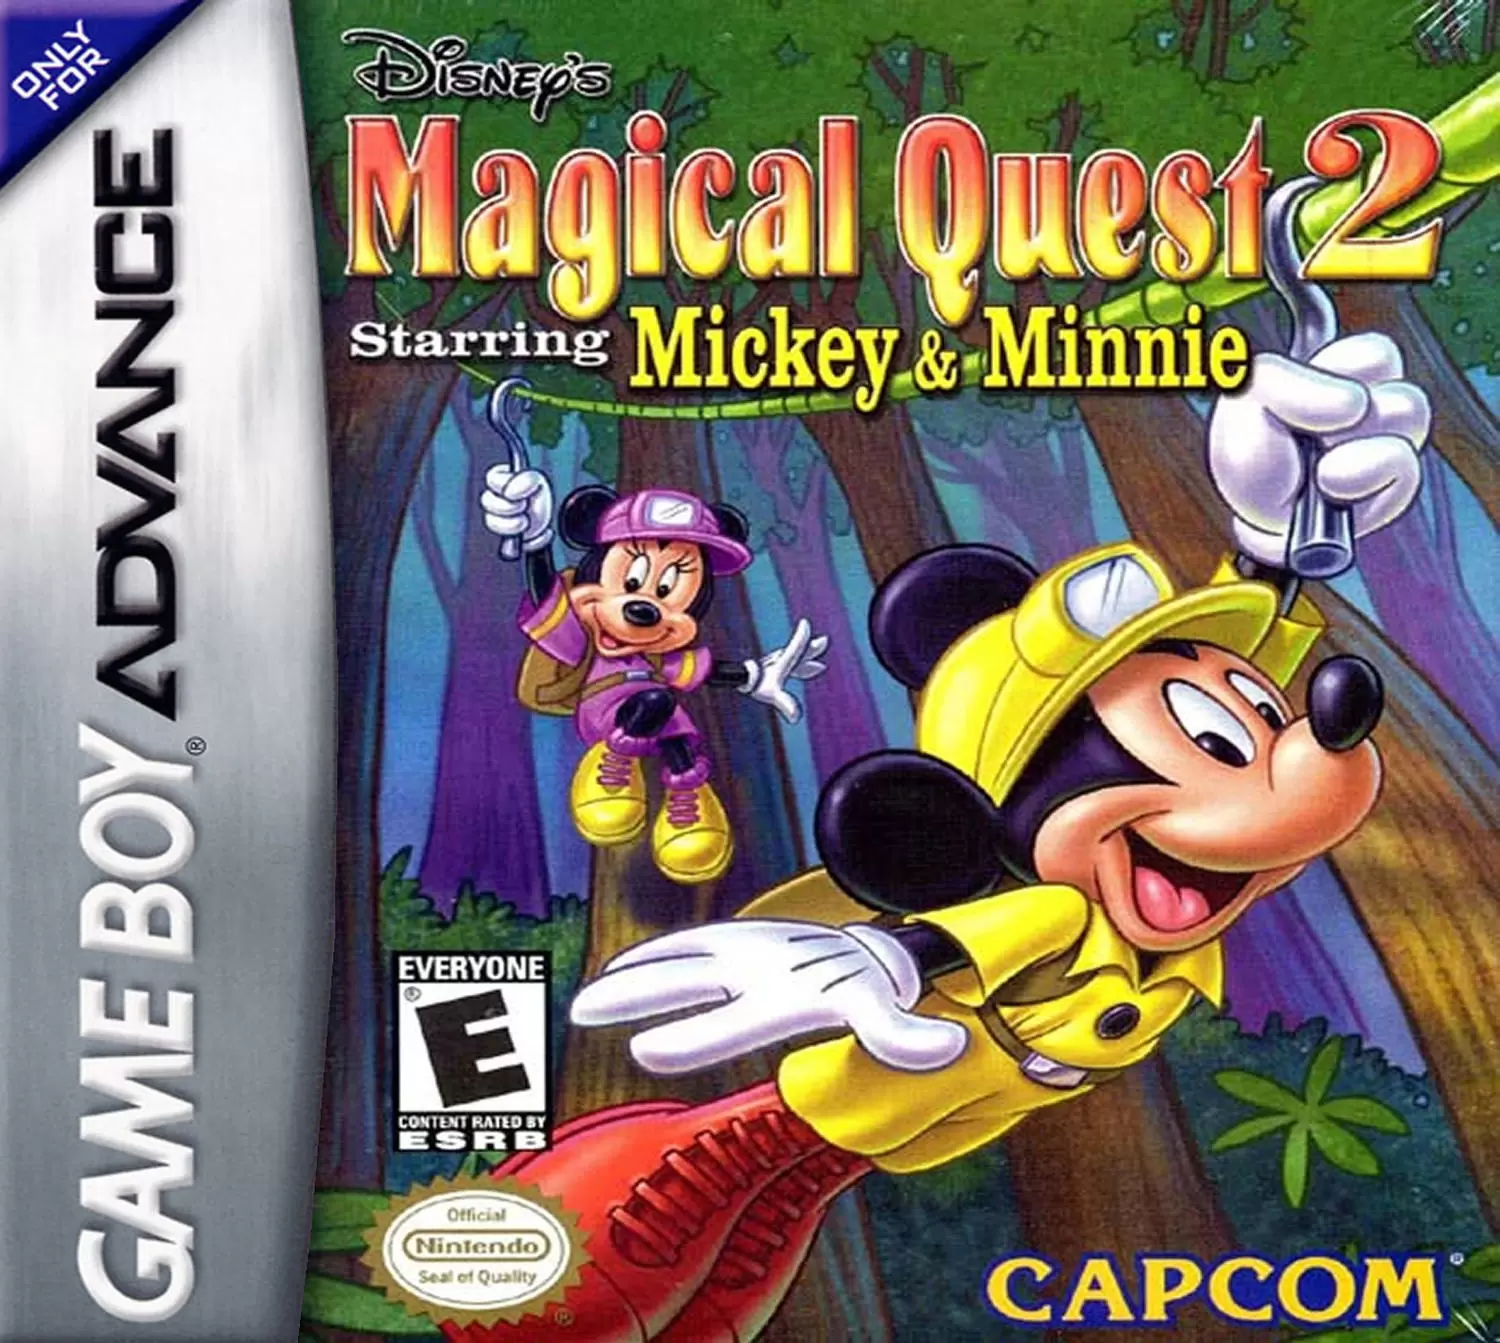 Game Boy Advance Games - Disney\'s Magical Quest 2 Starring Mickey & Minnie